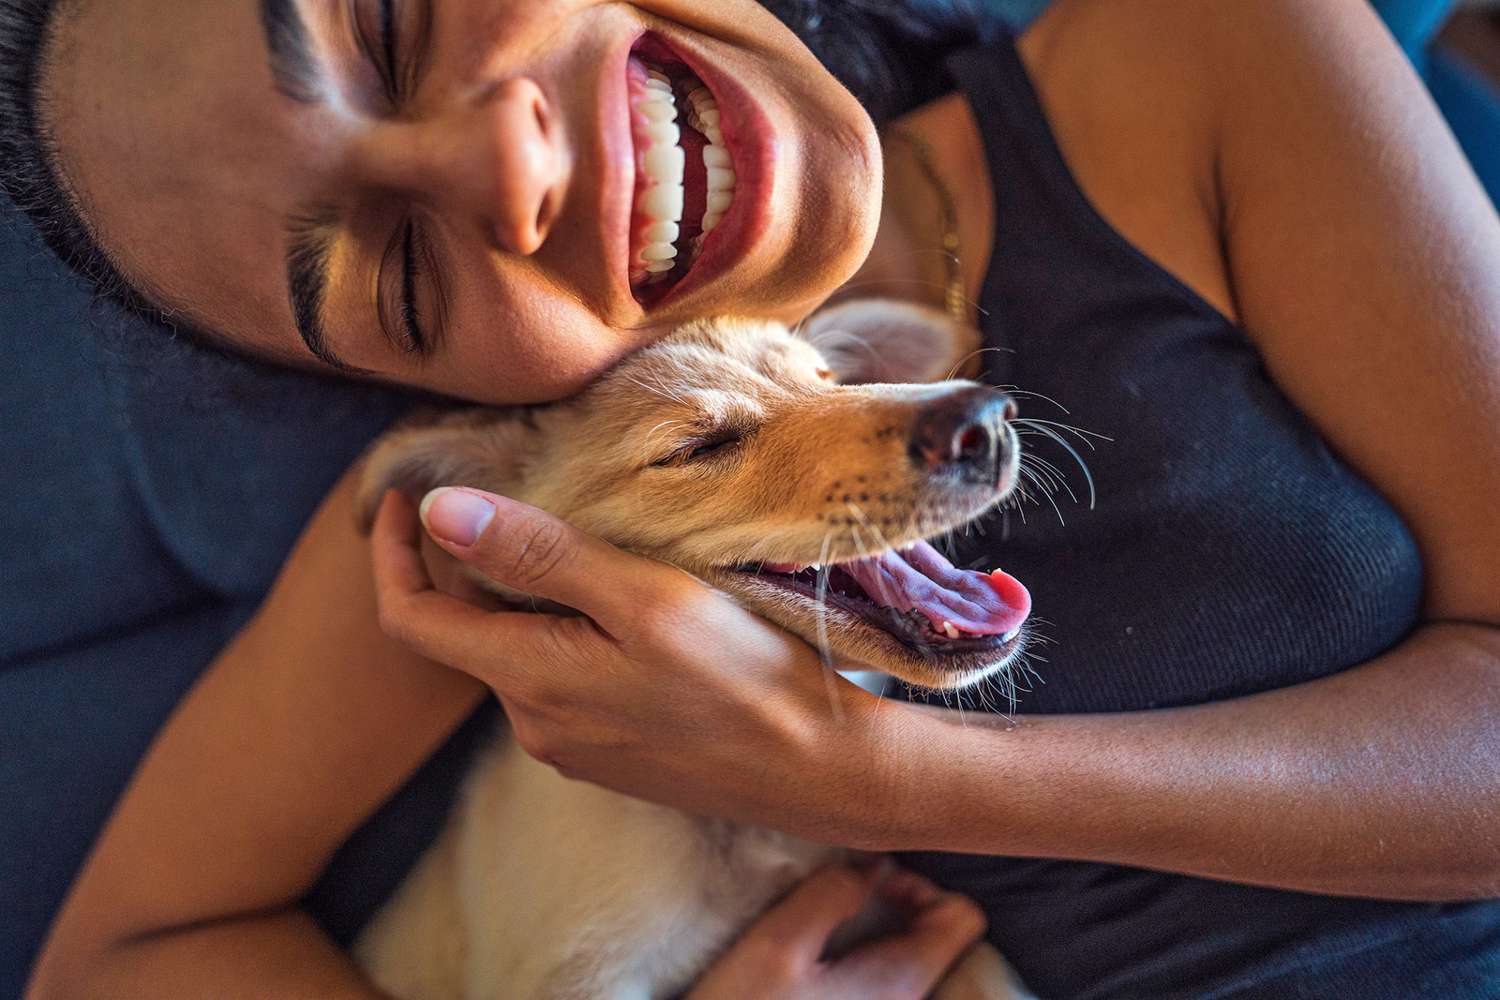 How to Bond With Your Dog in 9 Easy, Expert-Approved Ways